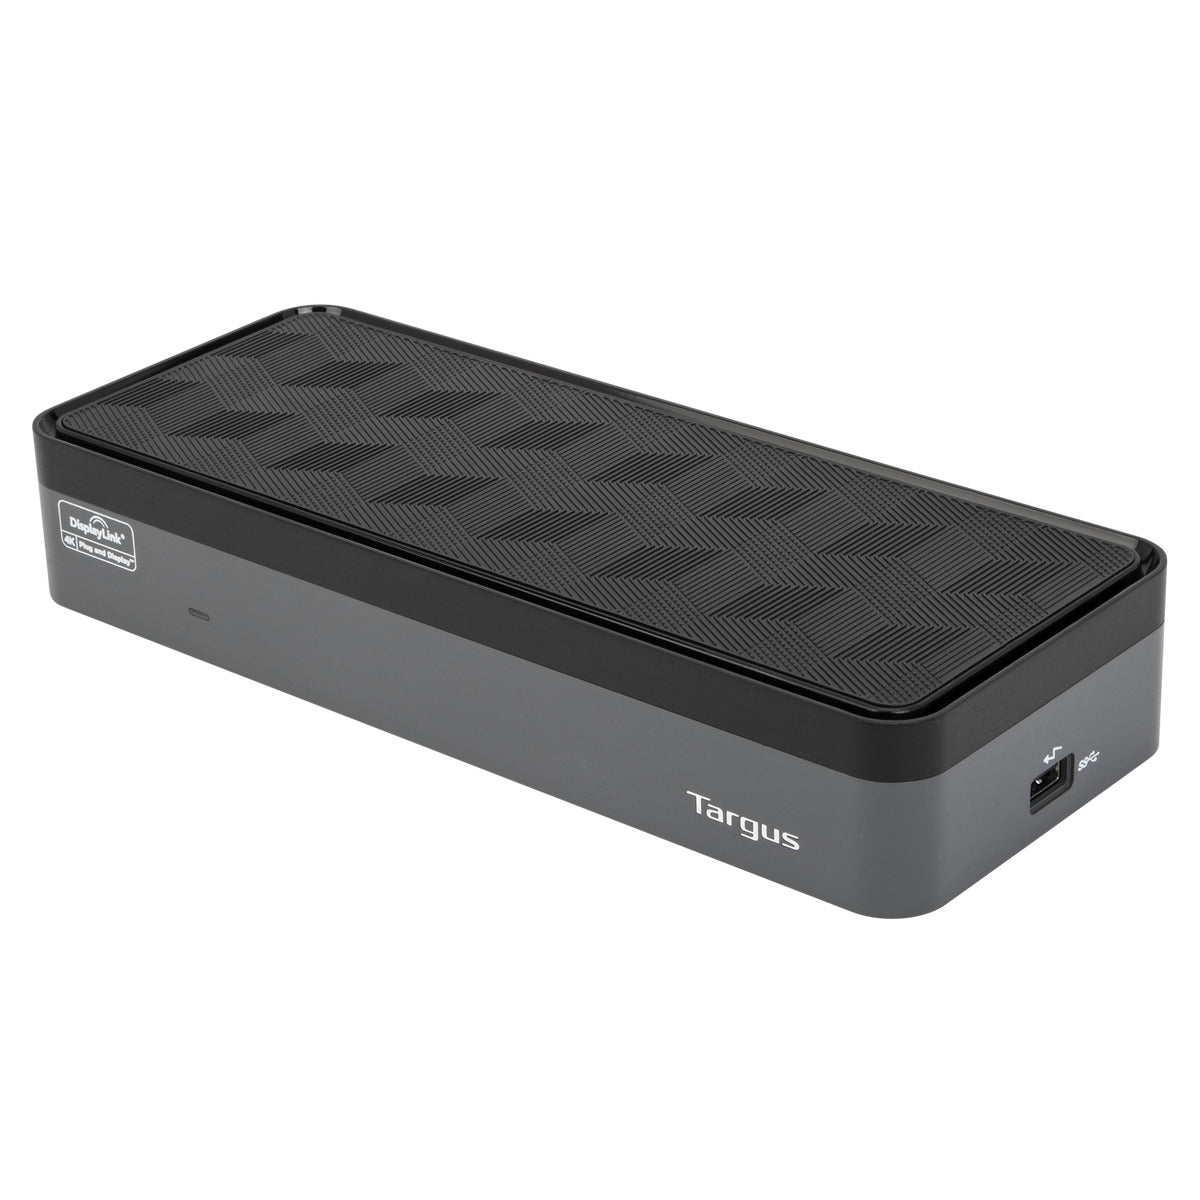 Targus-DOCK570-USB-C___-Universal-Quad-4K-Docking_Station-with-100W-Power-Delivery-YV-HK-8_077227bb-7acc-4a54-a5e7-c540c59a7f6e.jpg